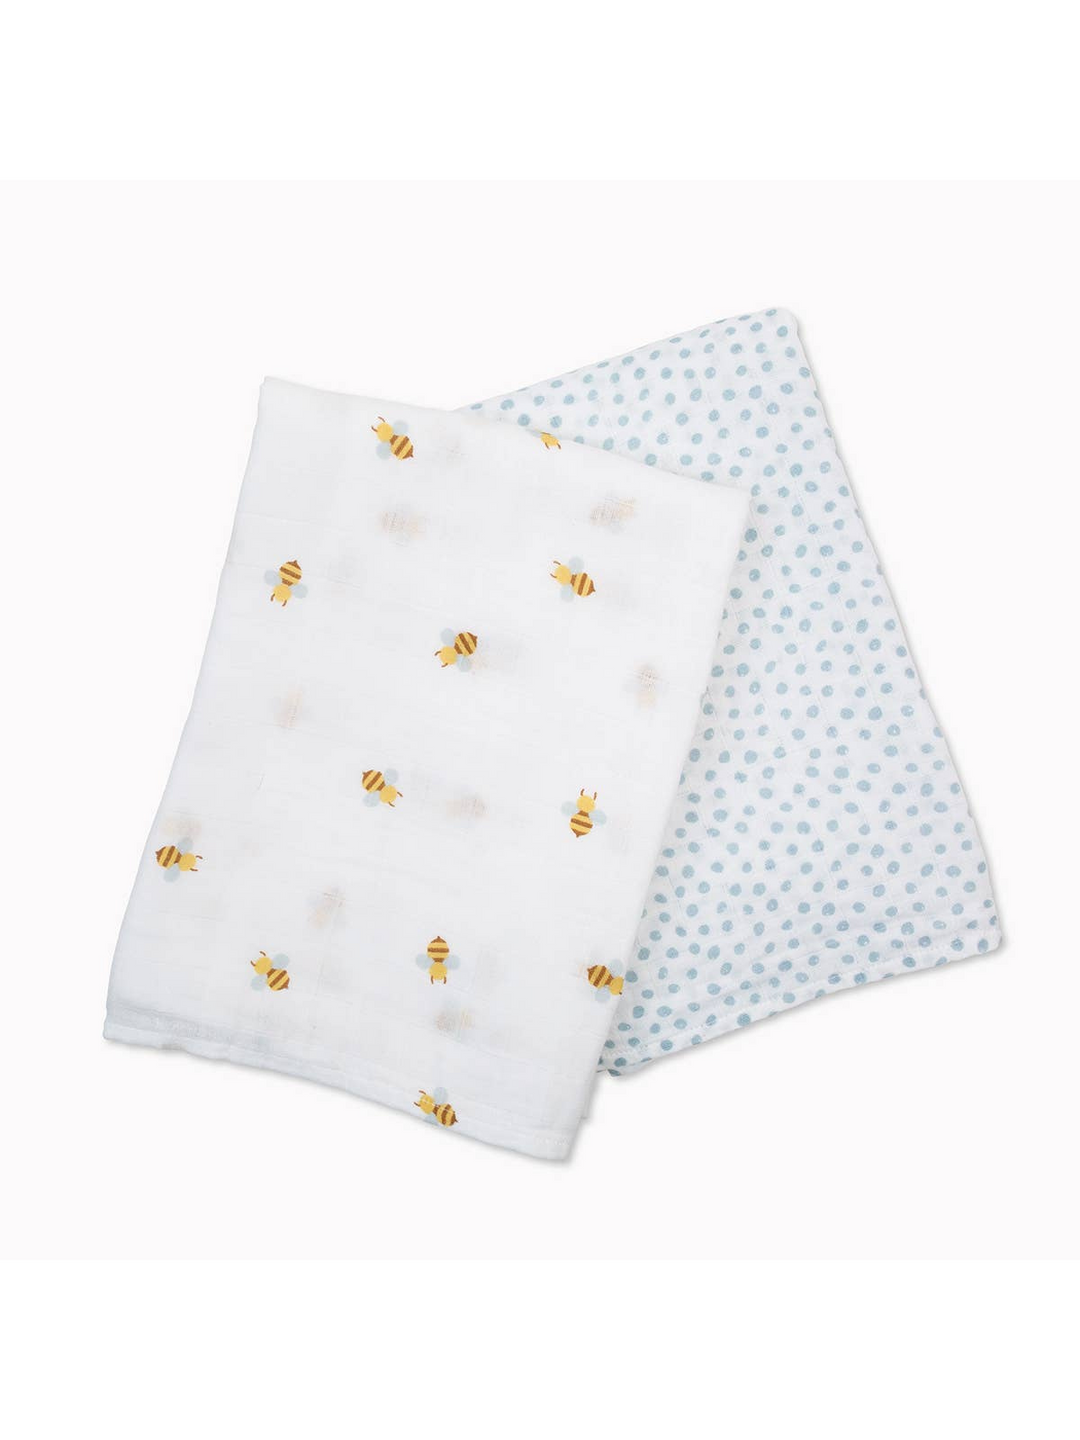 2-pack Cotton Swaddles - Bees/Dots